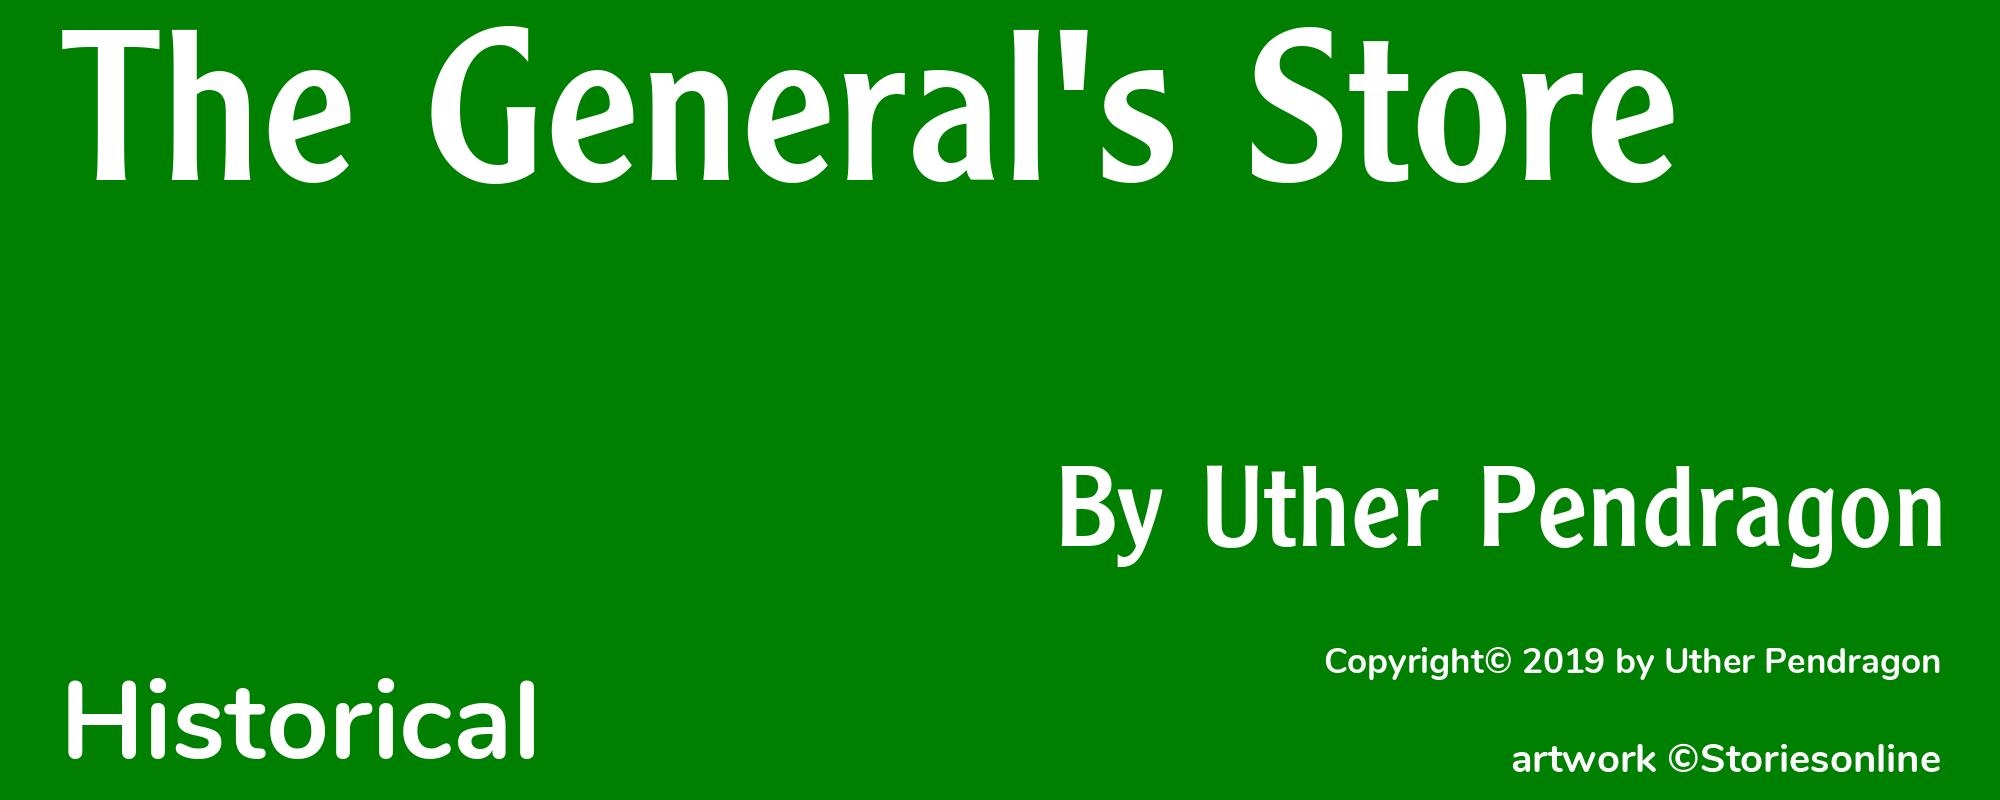 The General's Store - Cover